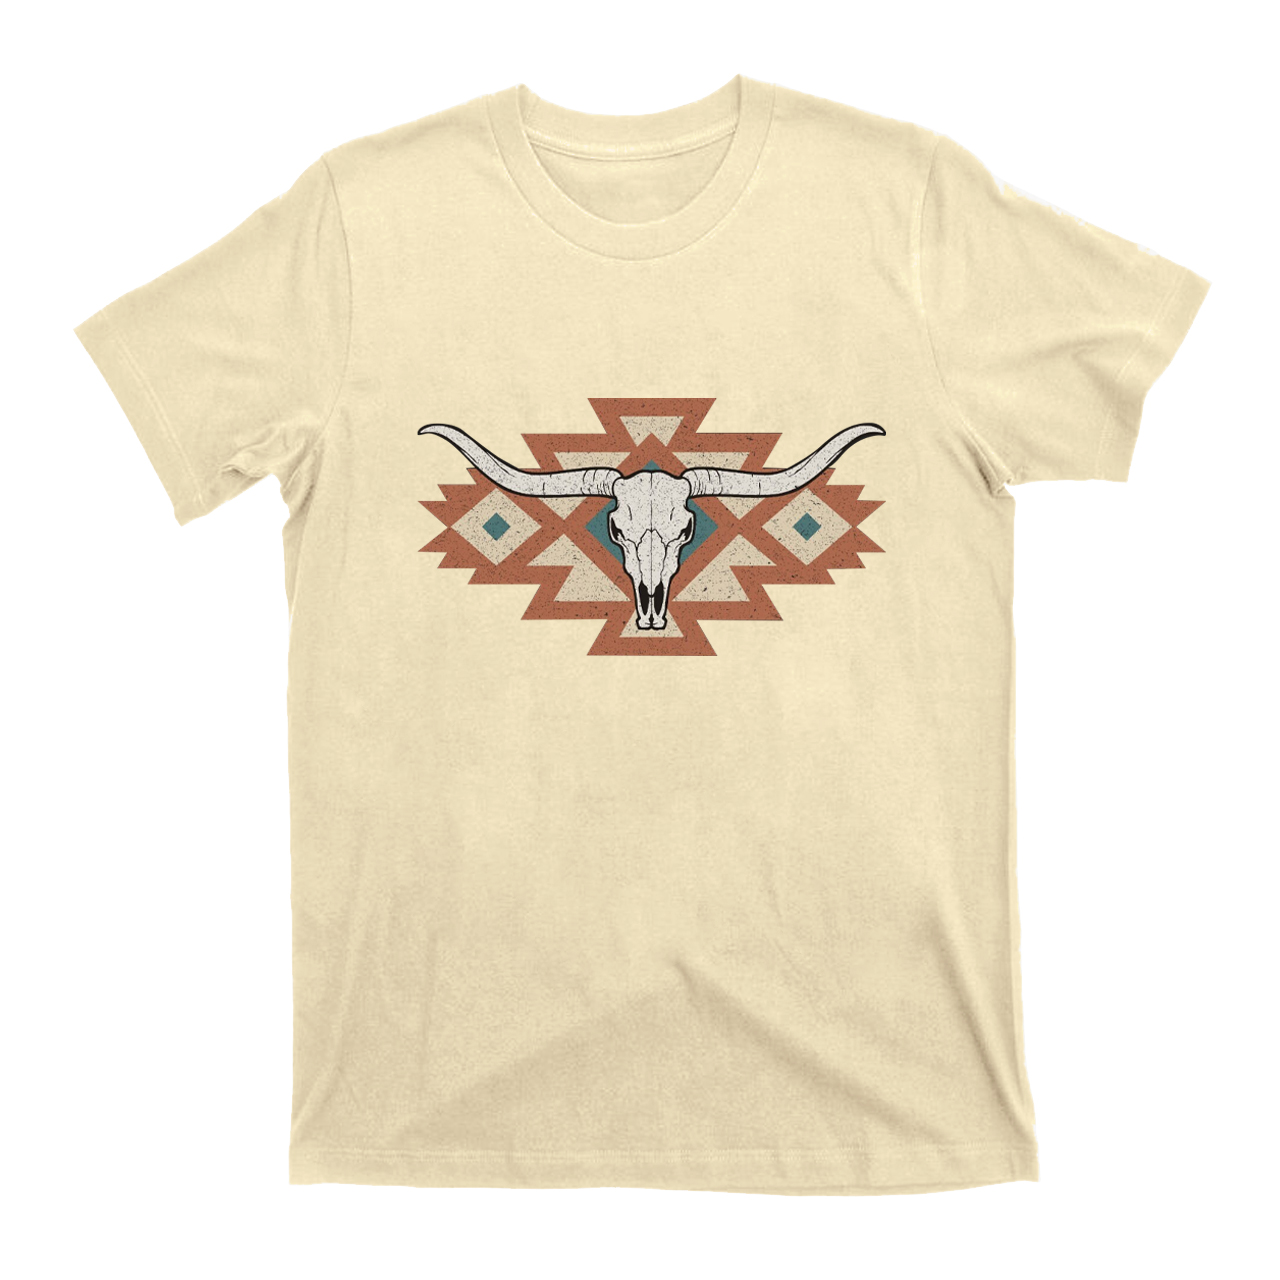 Country Western Aztec Tribal Longhorn Rodeo T-shirt